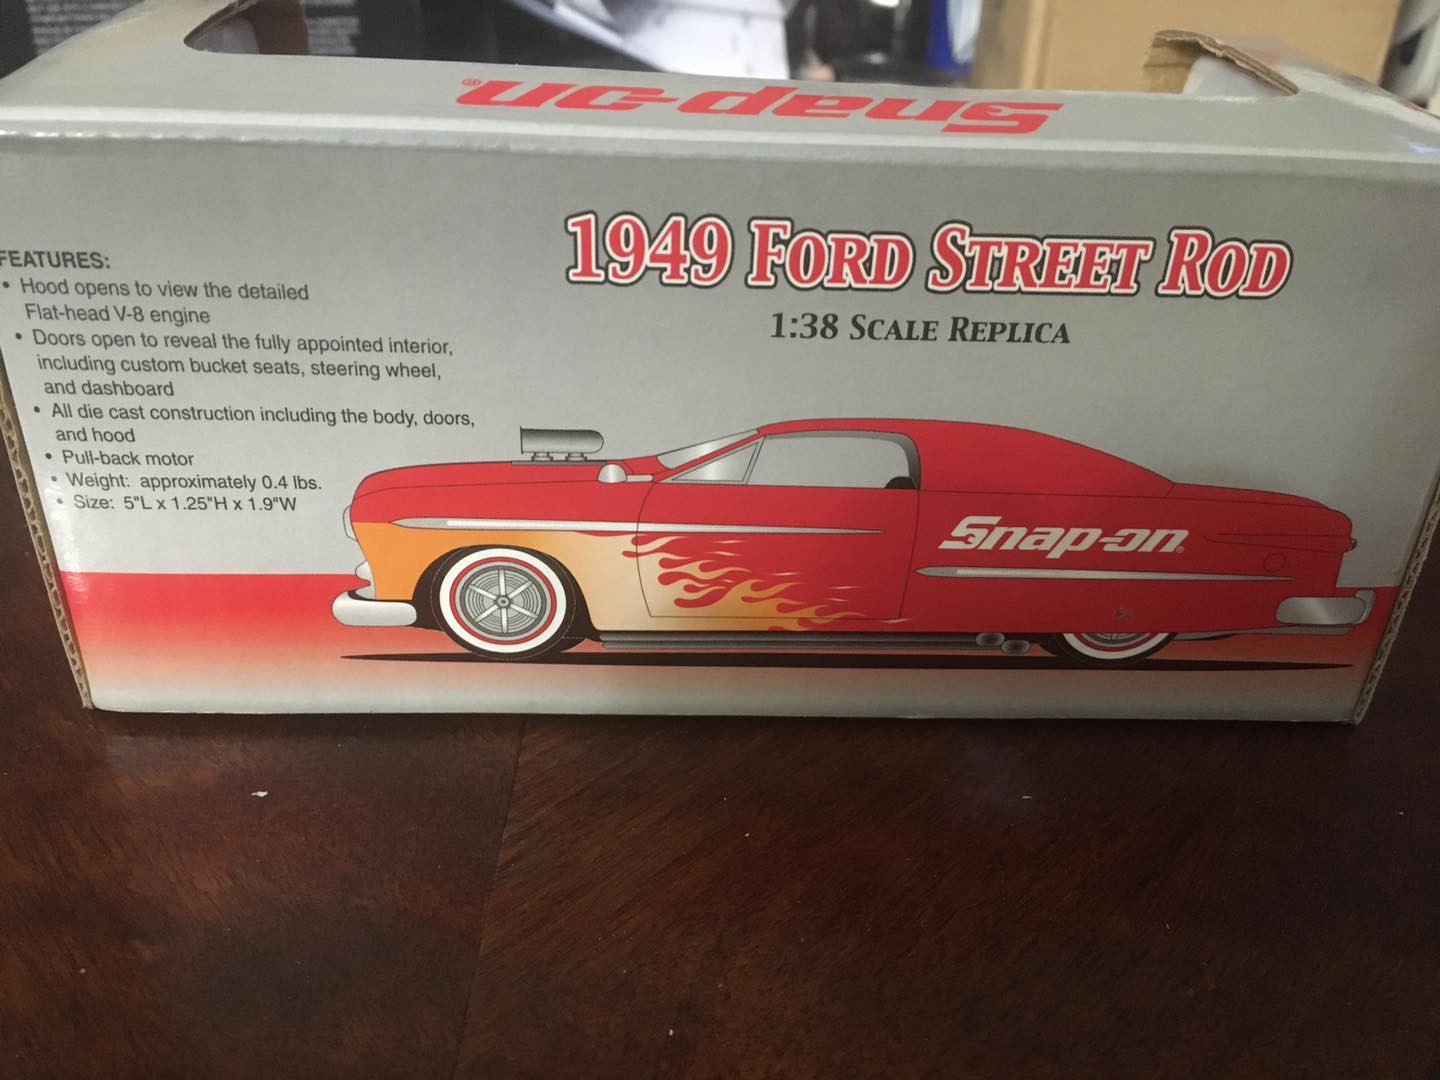 Snap on 1949 Ford Street Rod 1:38 scale replica toy model red crown PREMIUMS